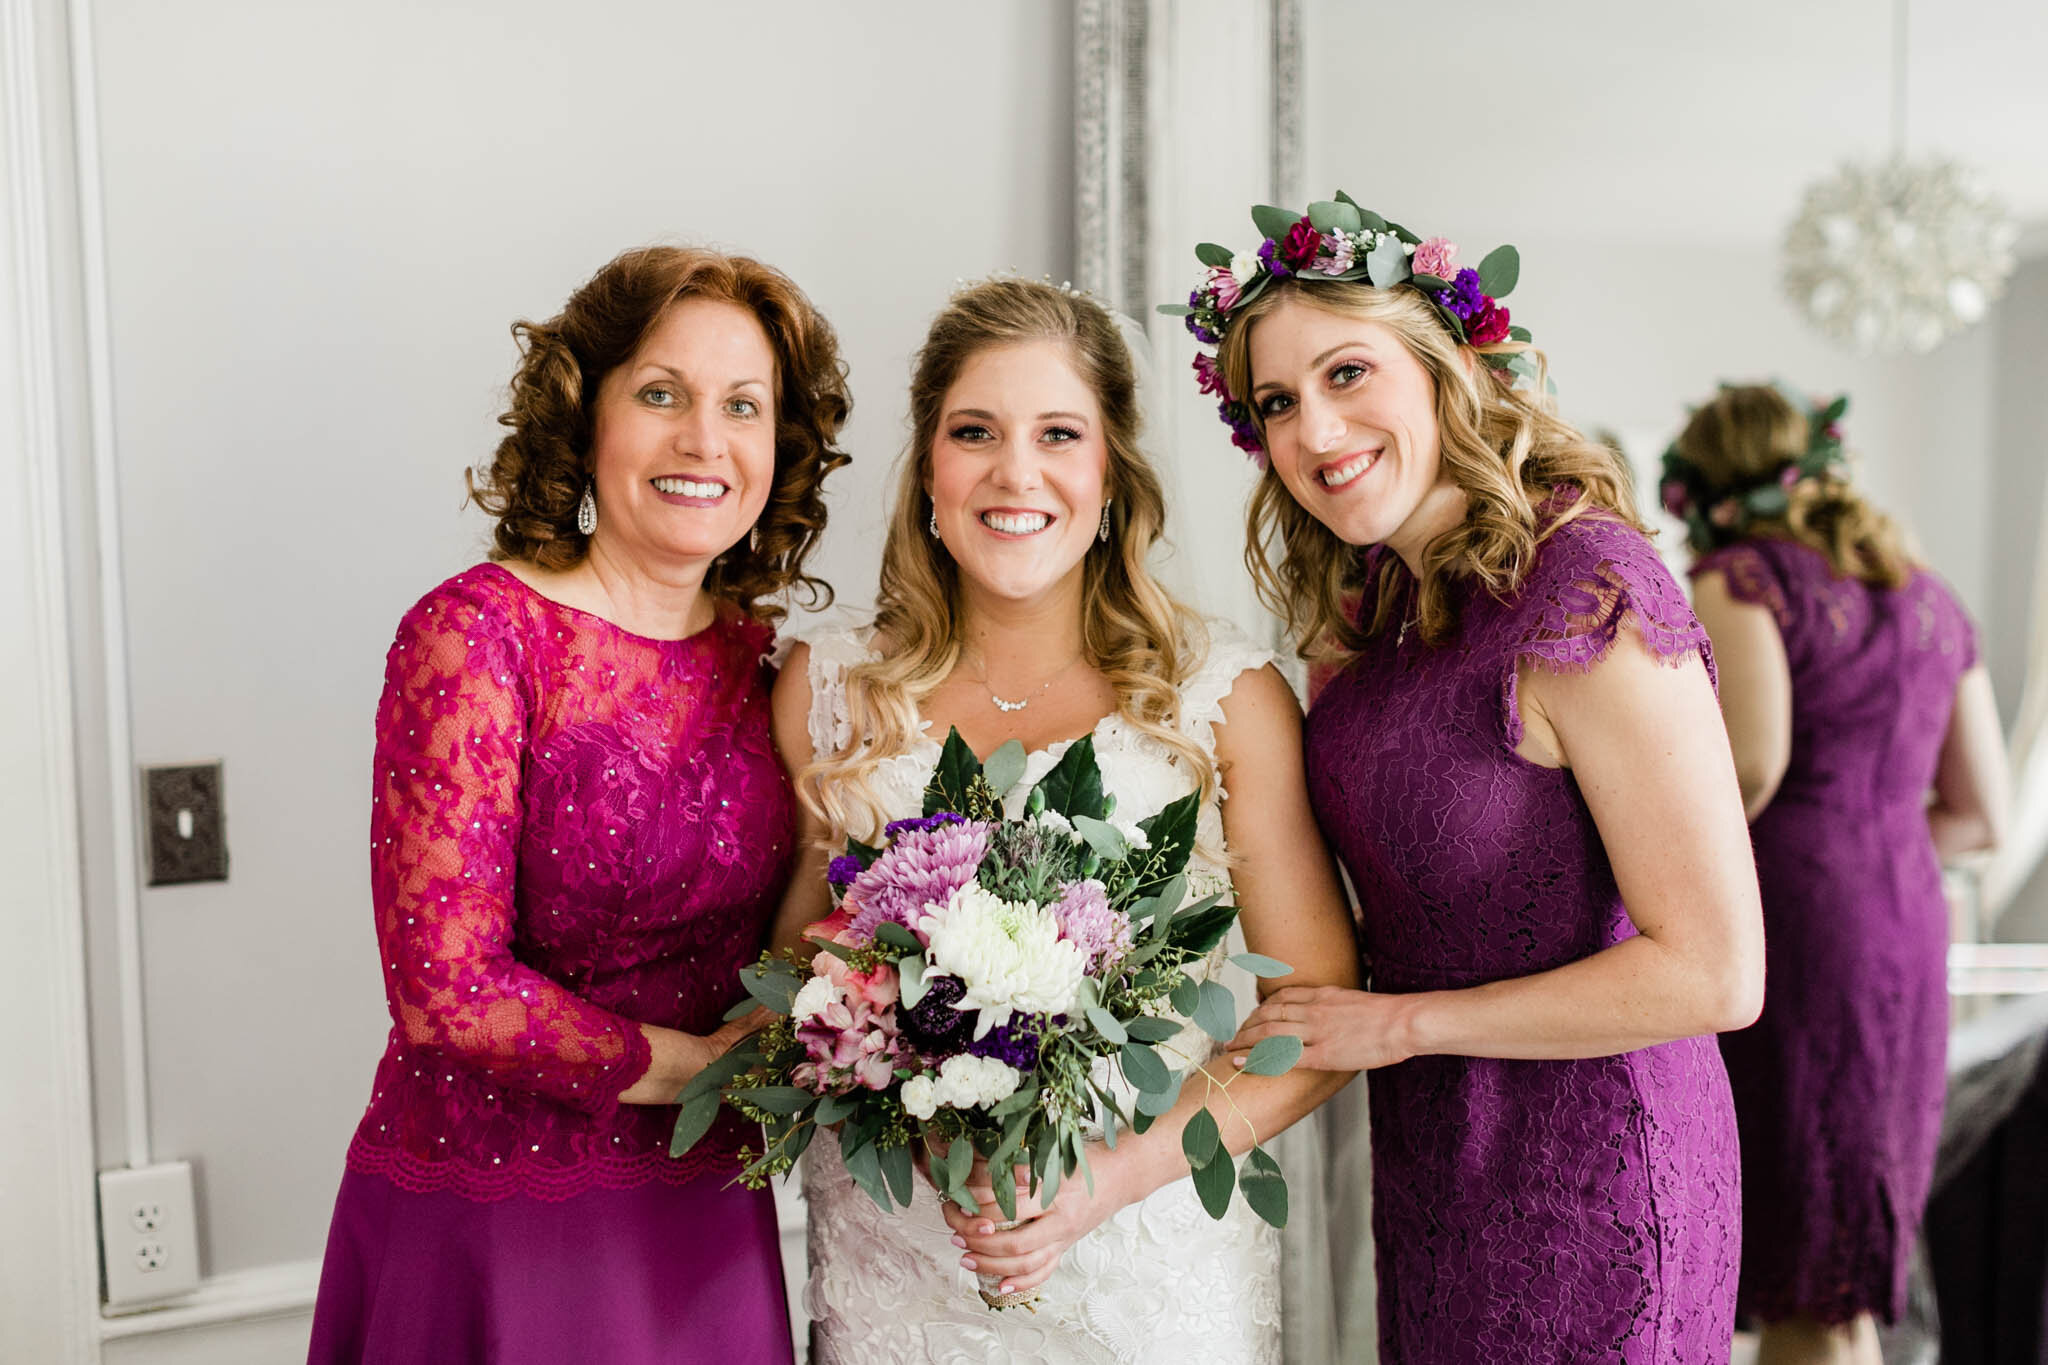 Durham Wedding Photographer | By G. Lin Photography | Candid portrait of bride with mother and sister